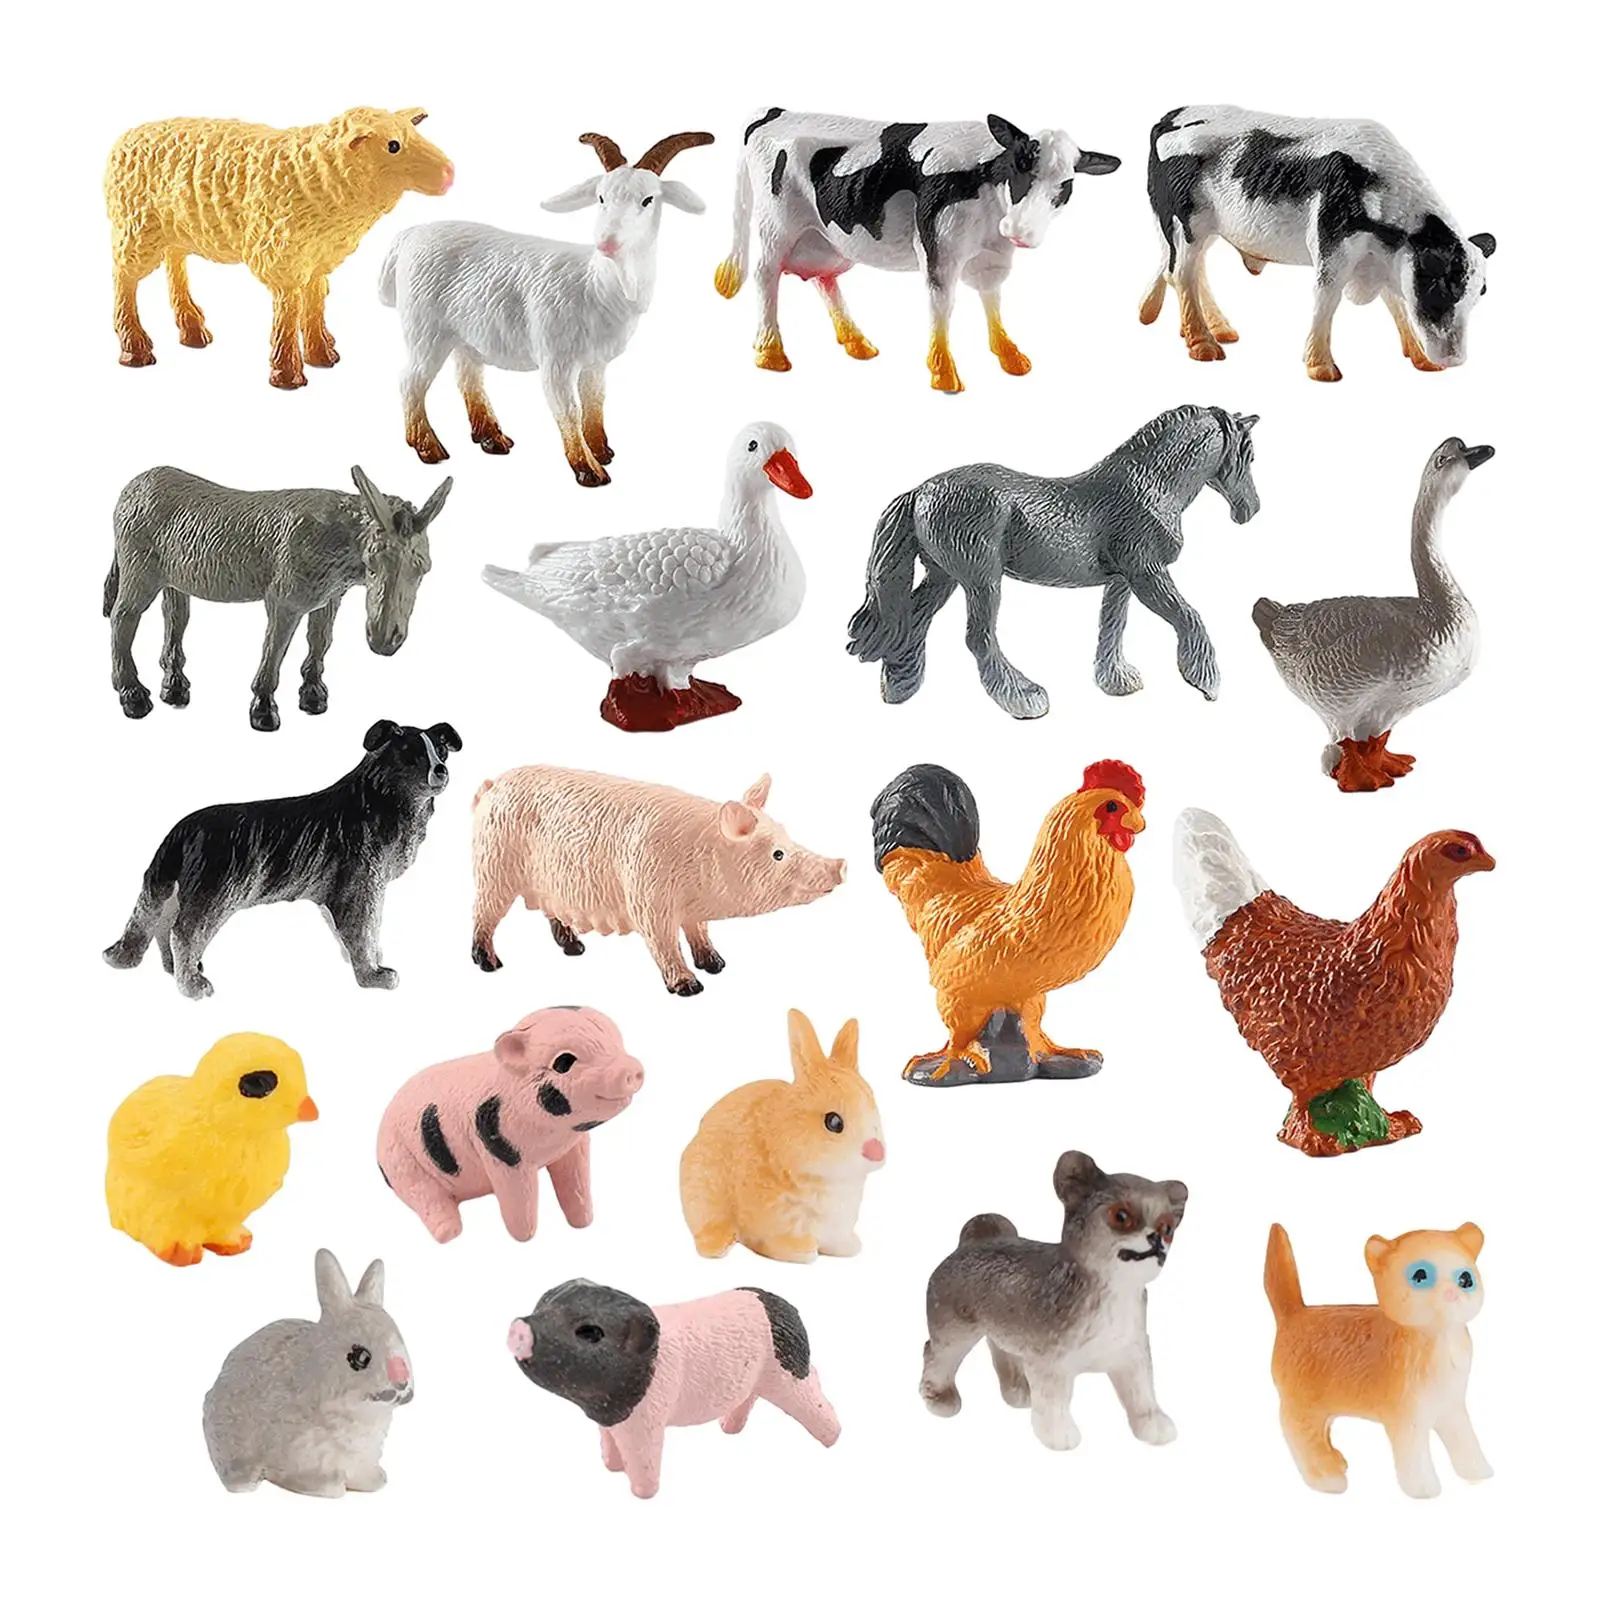 19 Pieces Farm Animal Model Set Dog Horse Chicken for Educational Learning Toys